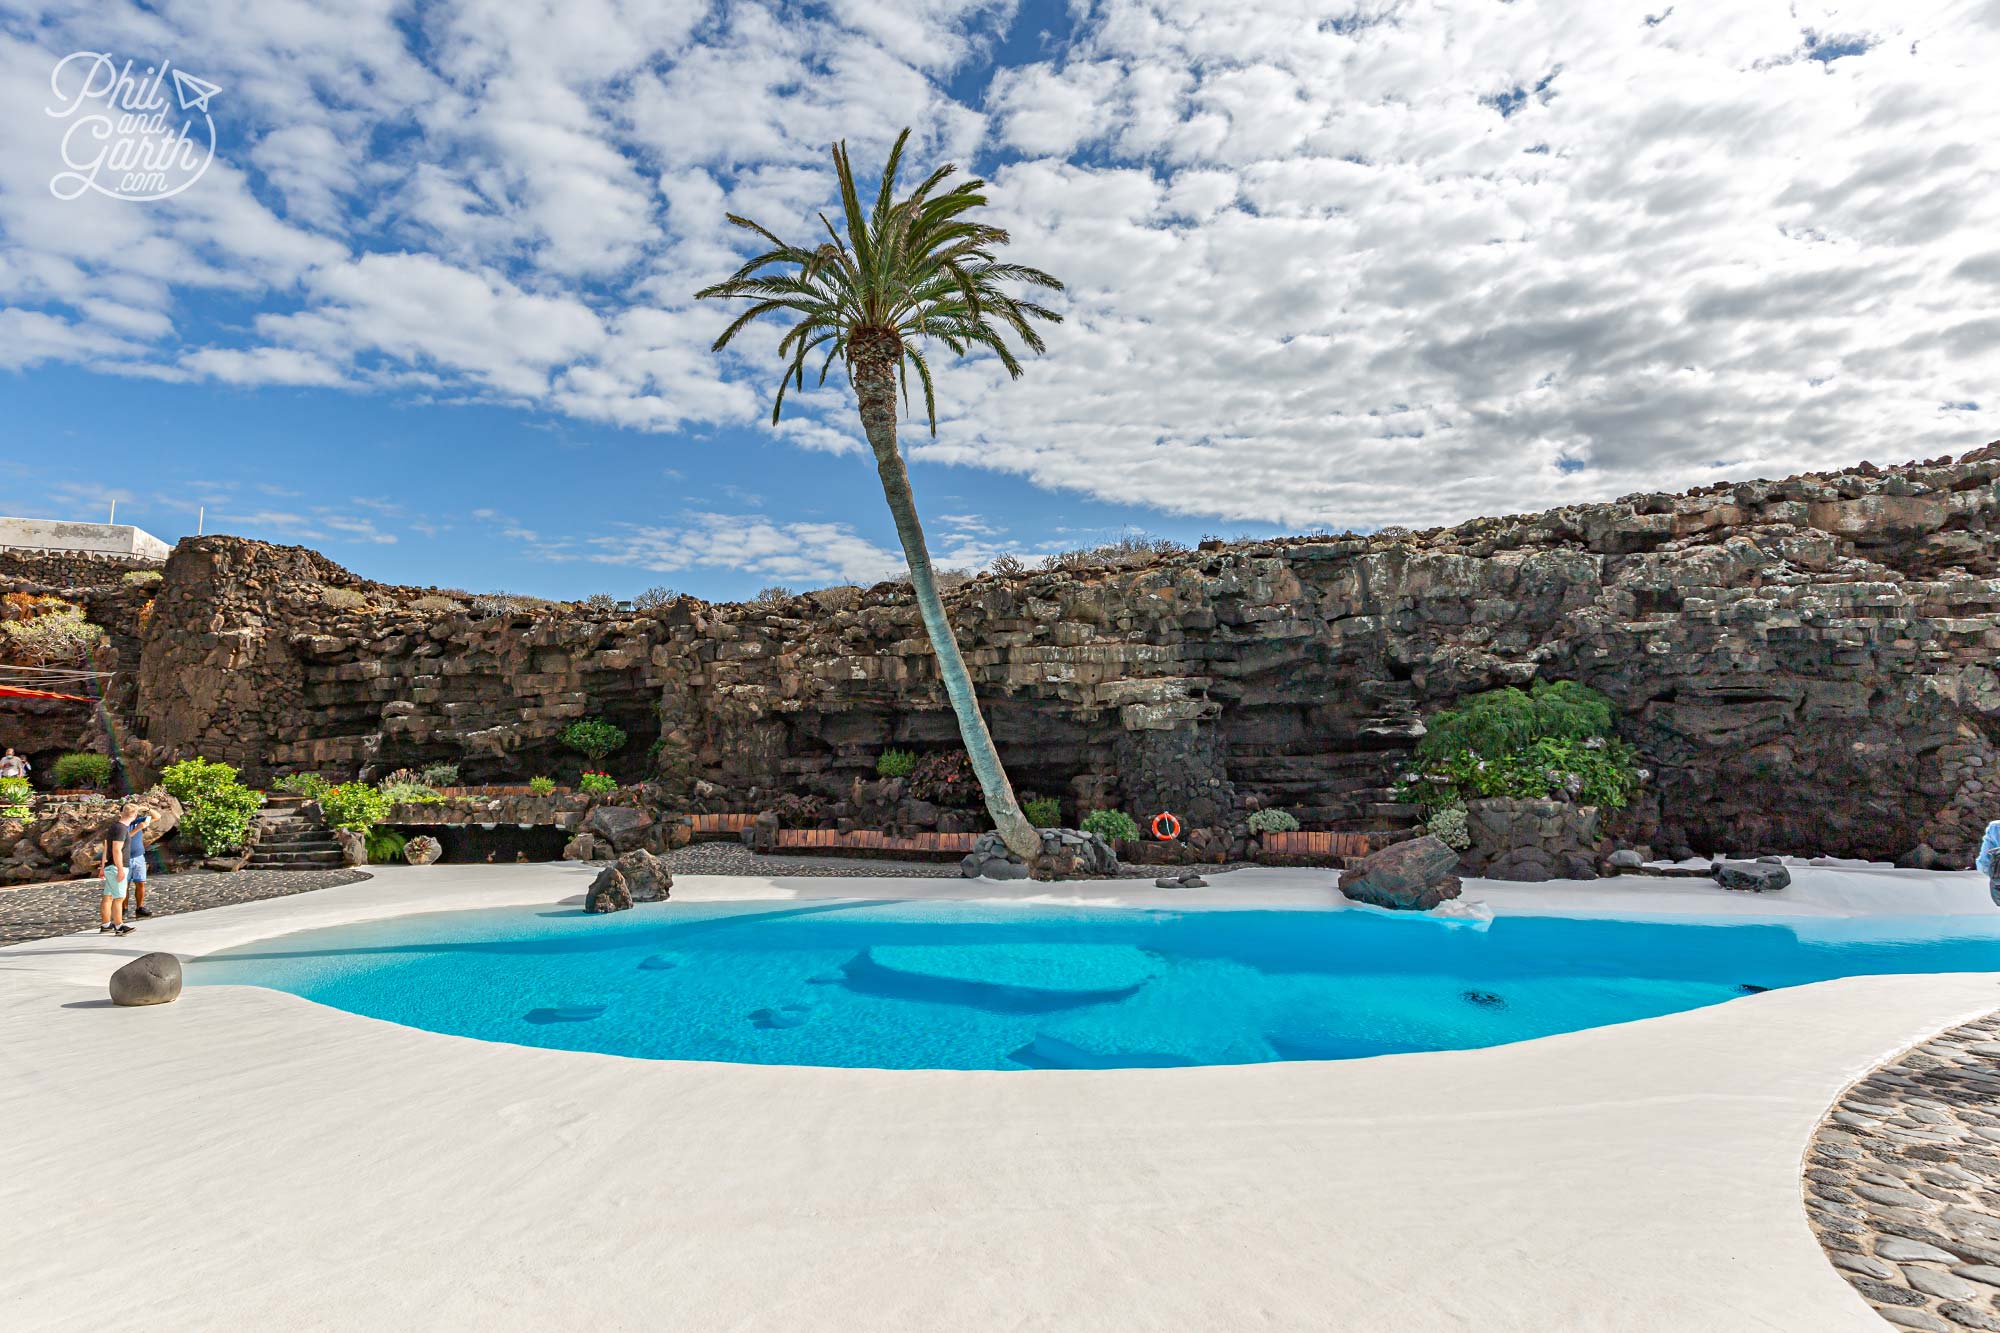 A 100 year old Canarian palm tree stretches over the swimming pool’s water